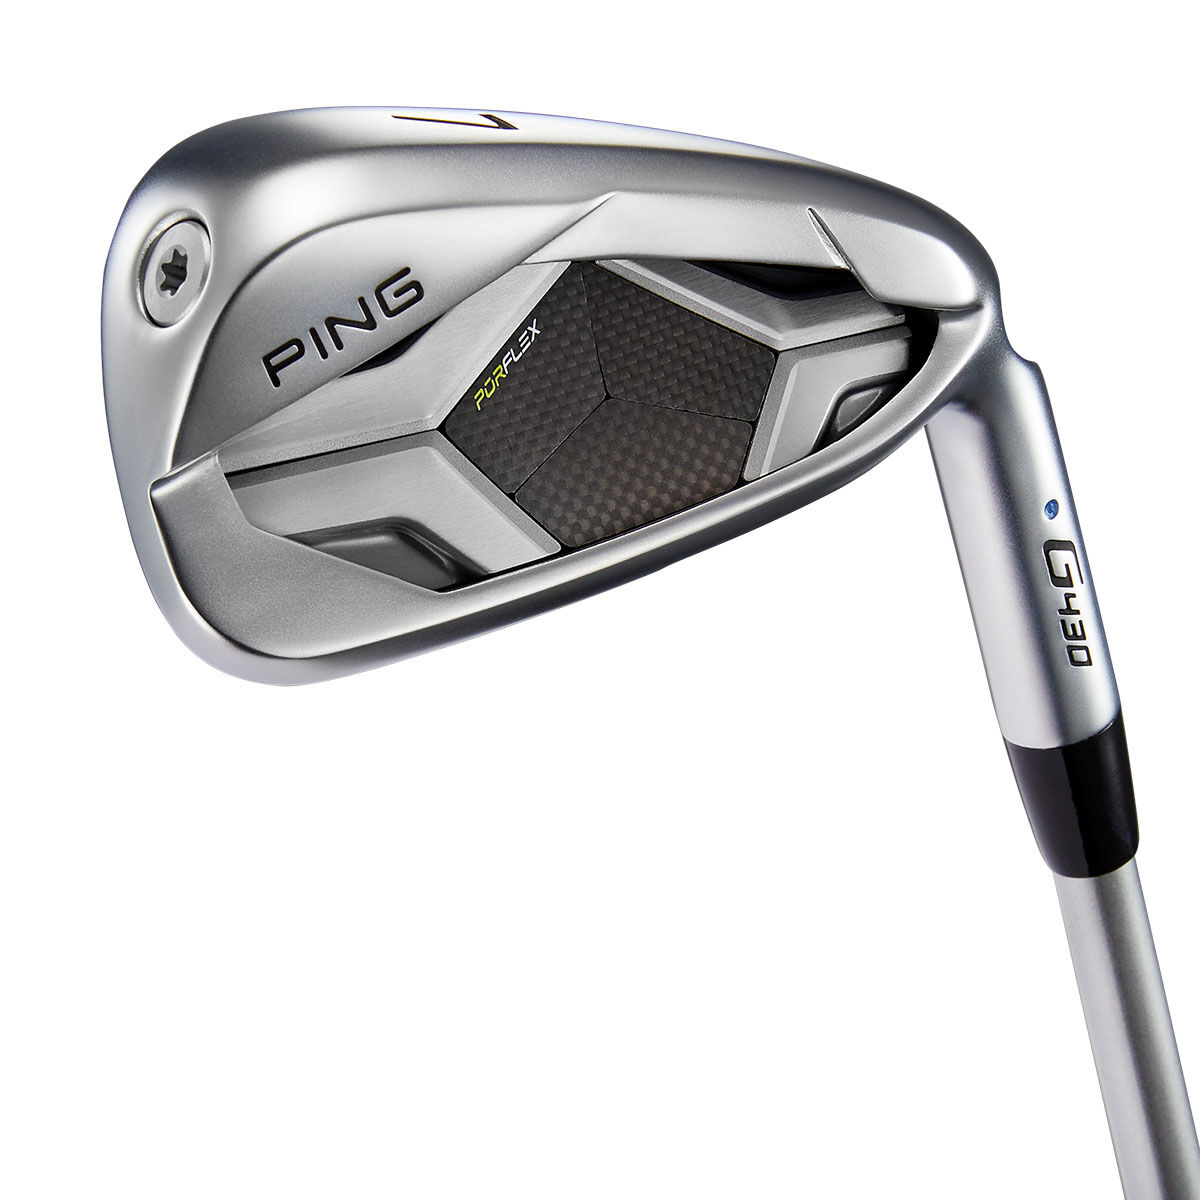 Ping Grey and Black G430 HL Graphite Golf Irons | American Golf, One Size von Ping